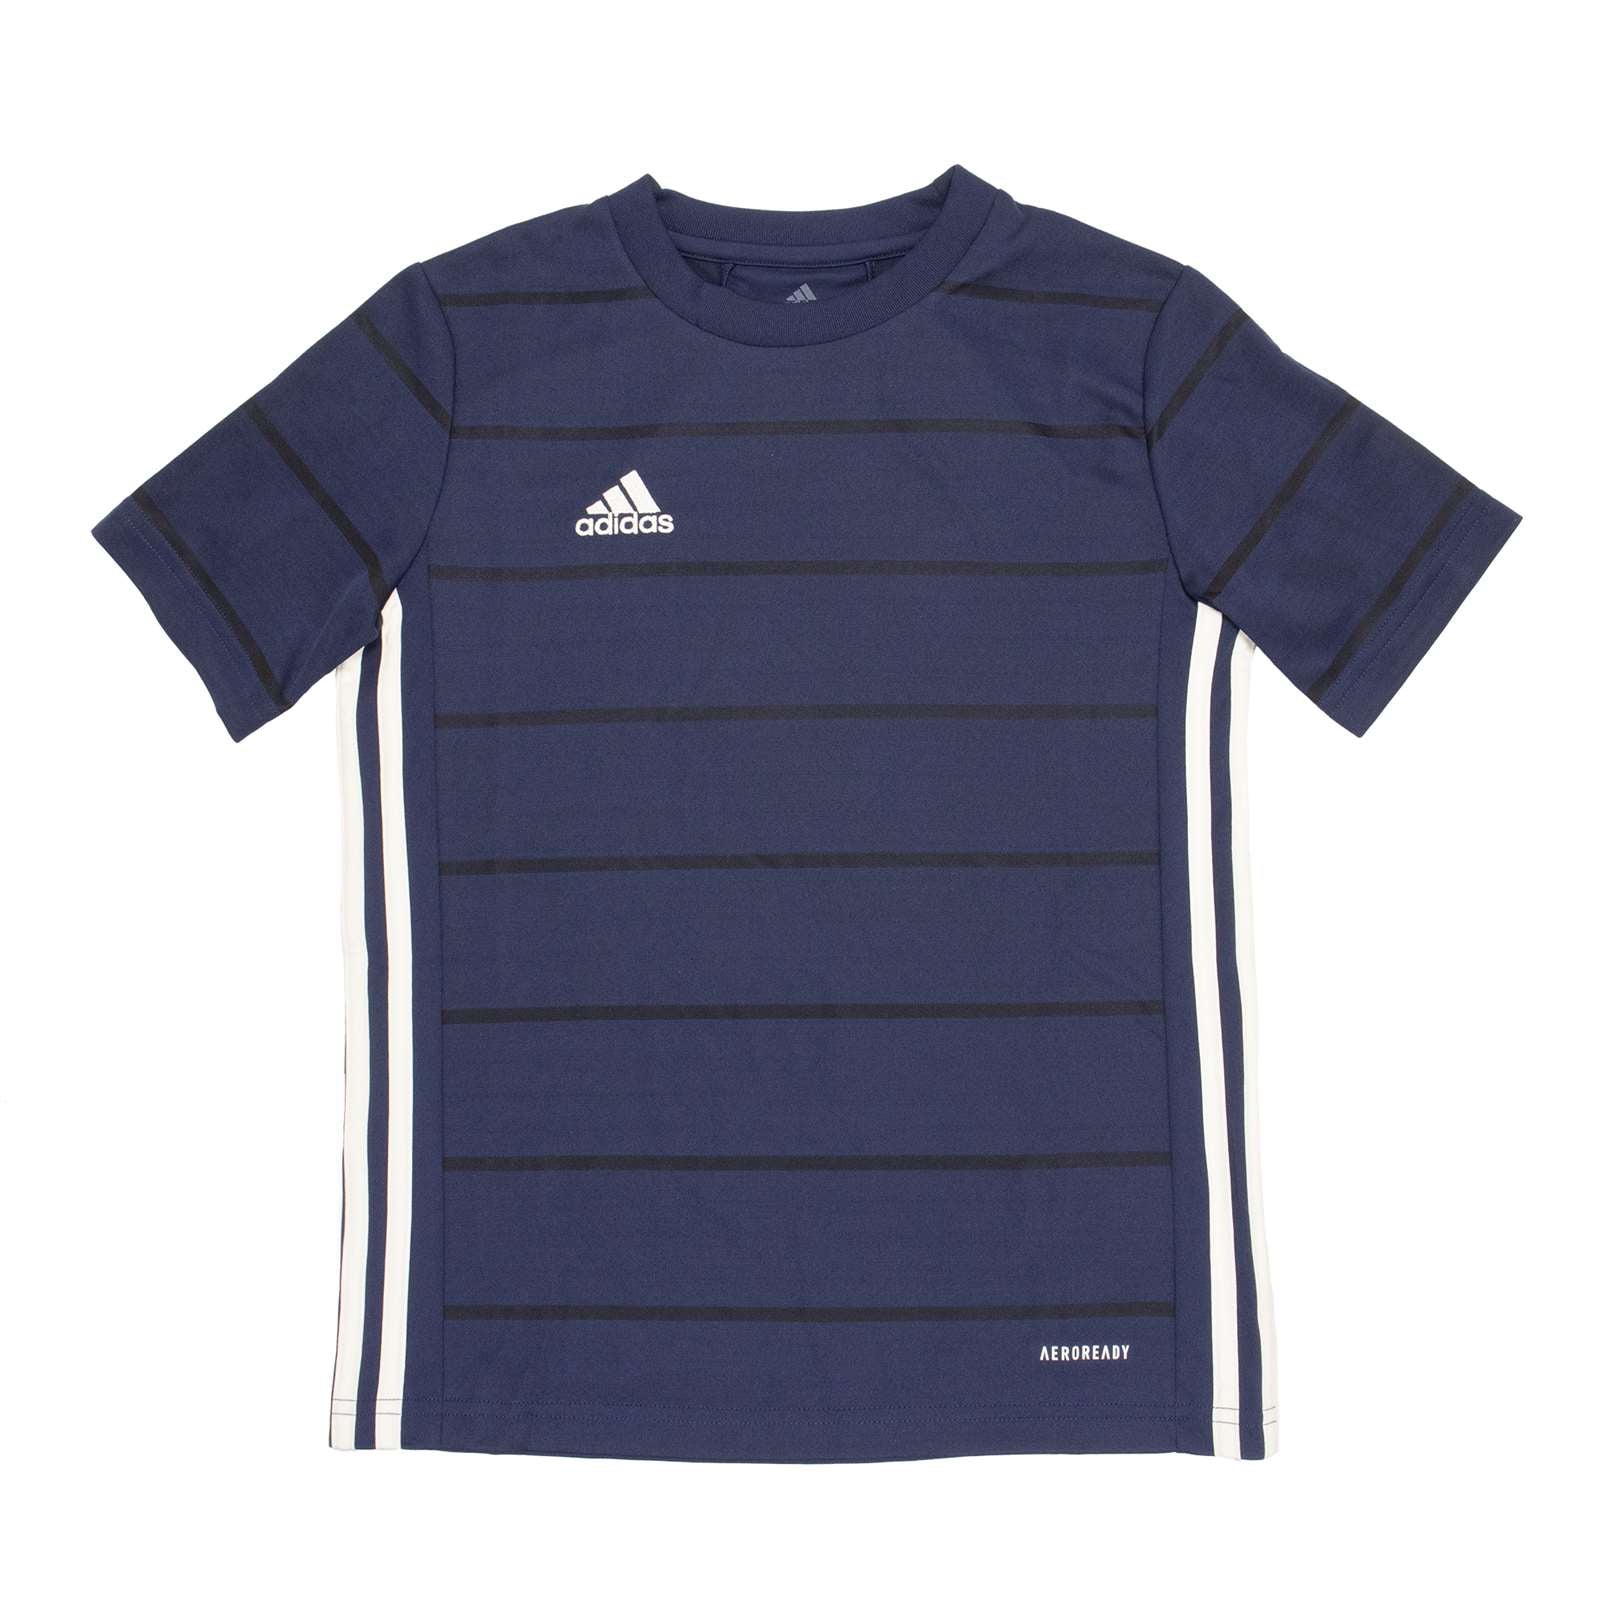 Adidas Boy Campeon 21 Youth Soccer Jersey